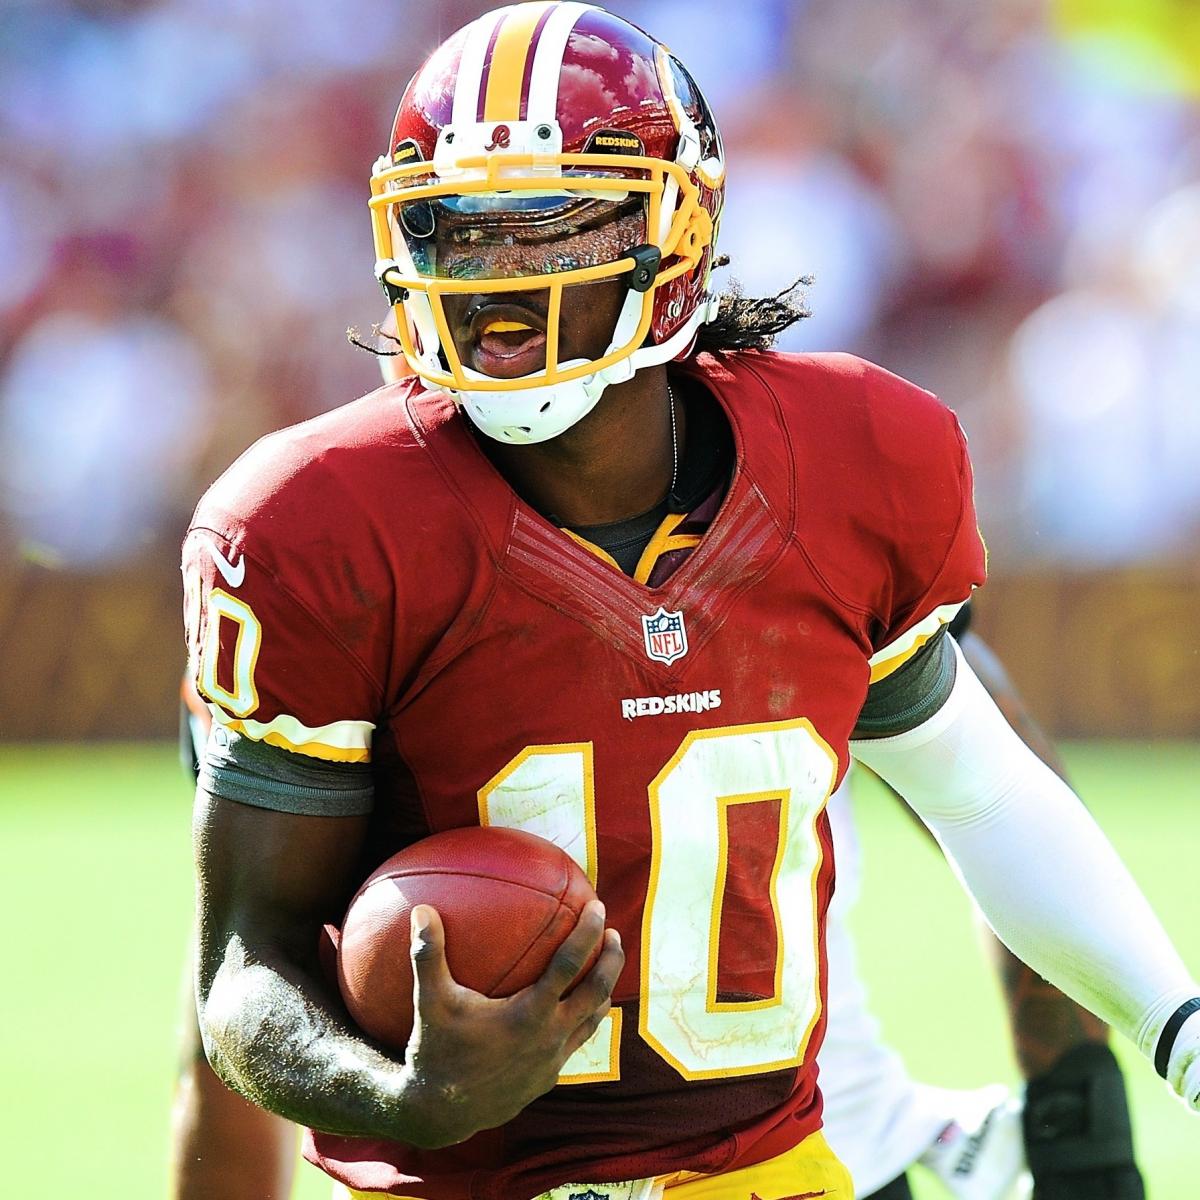 Best 40 Time For A Quarterback (On Video): Robert Griffin III (RG3) 40 Yard  Dash Breakdown #faster40 